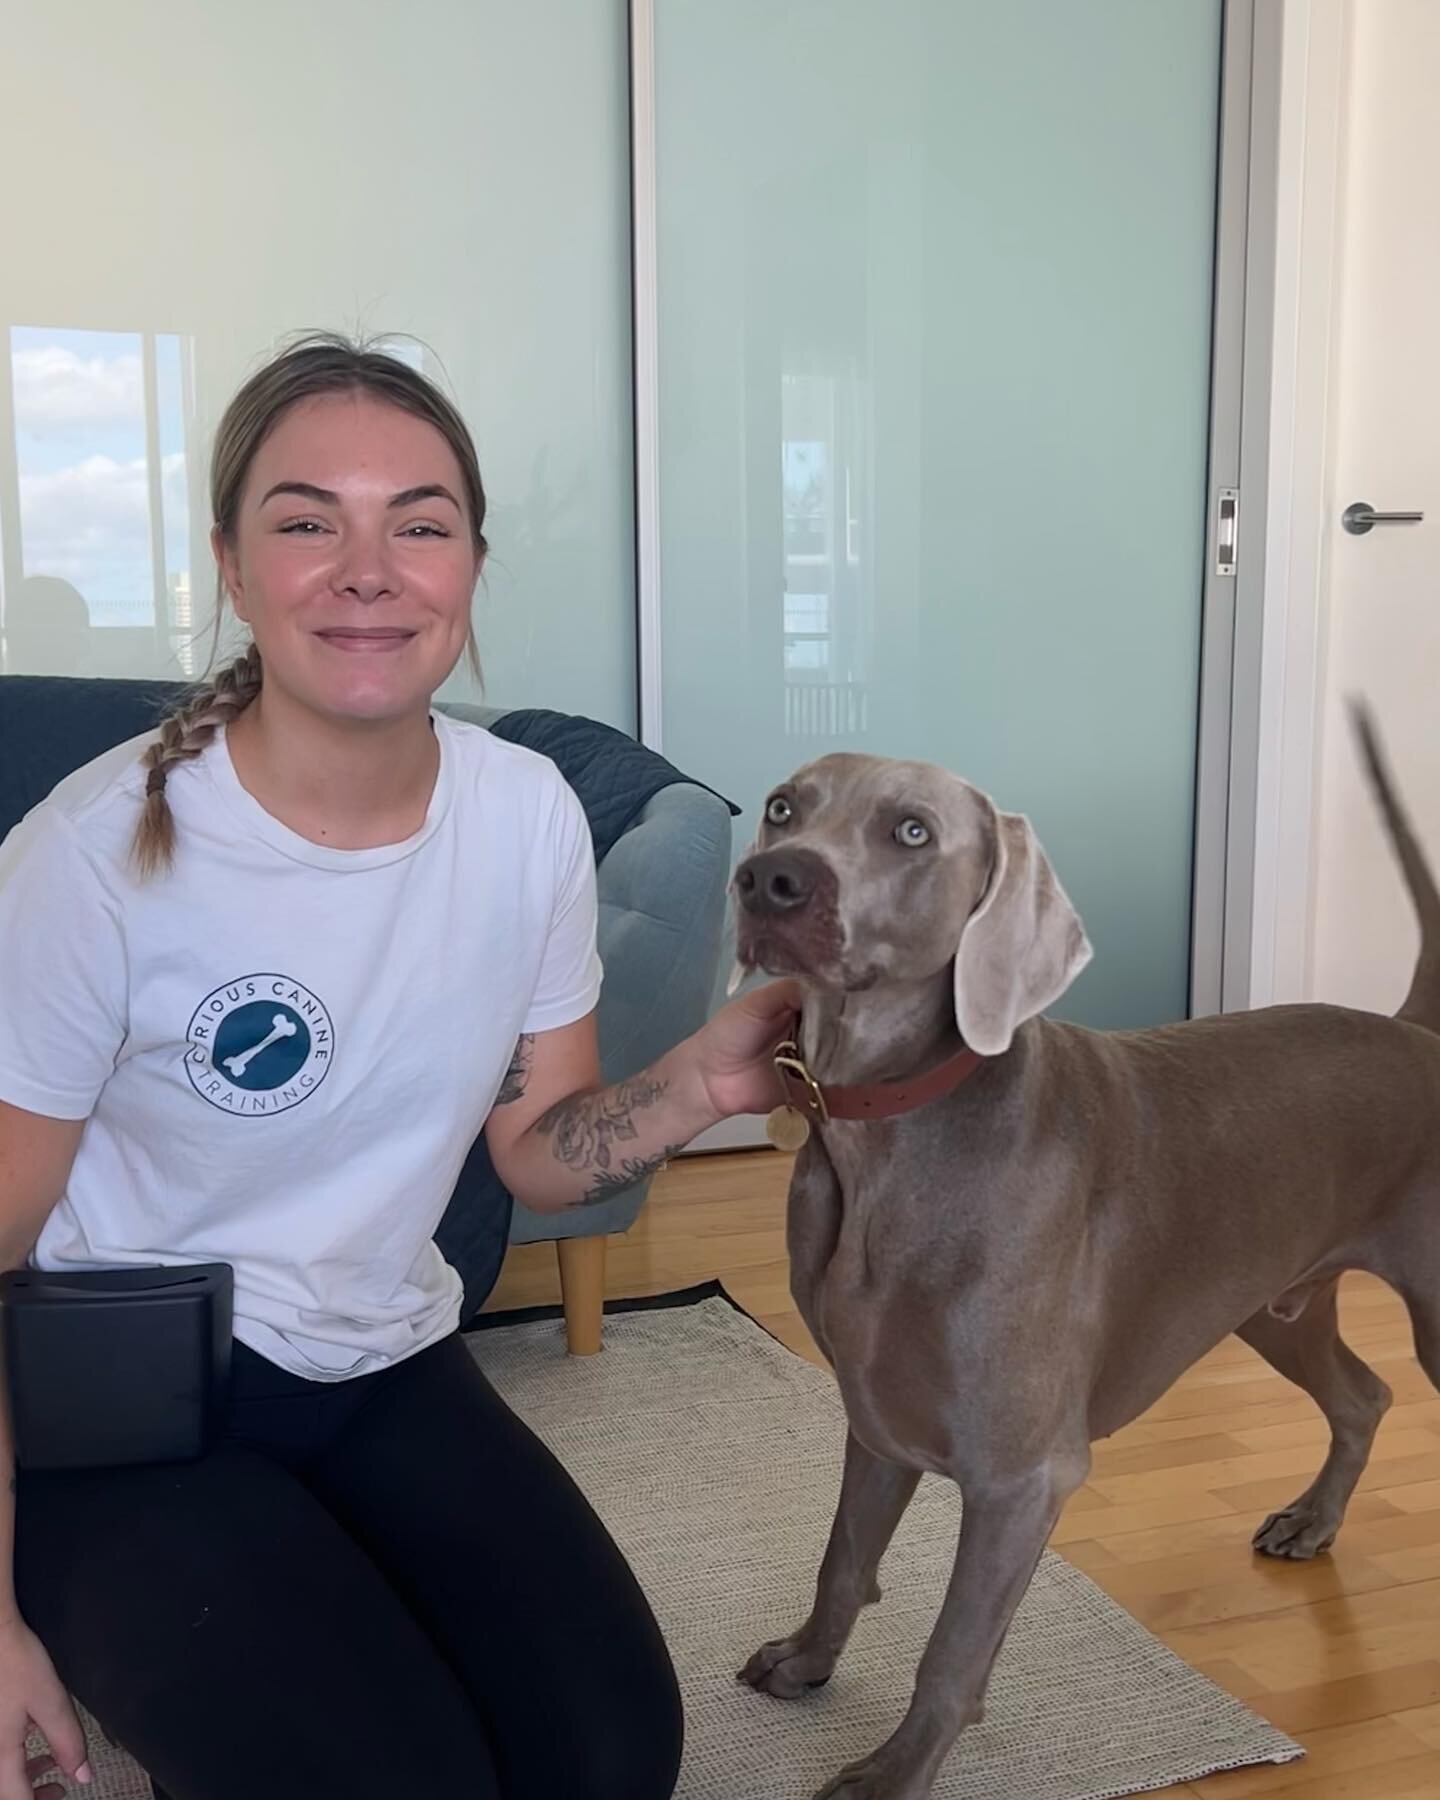 We&rsquo;ll just get a quick pic before I go &hellip; Weimaraner edition🤝

It&rsquo;s was so lovely to meet @bowie.the.weimaraner and his pet parents today to start the week after a long weekend break 🐣

He unfortunately didn&rsquo;t have the best 